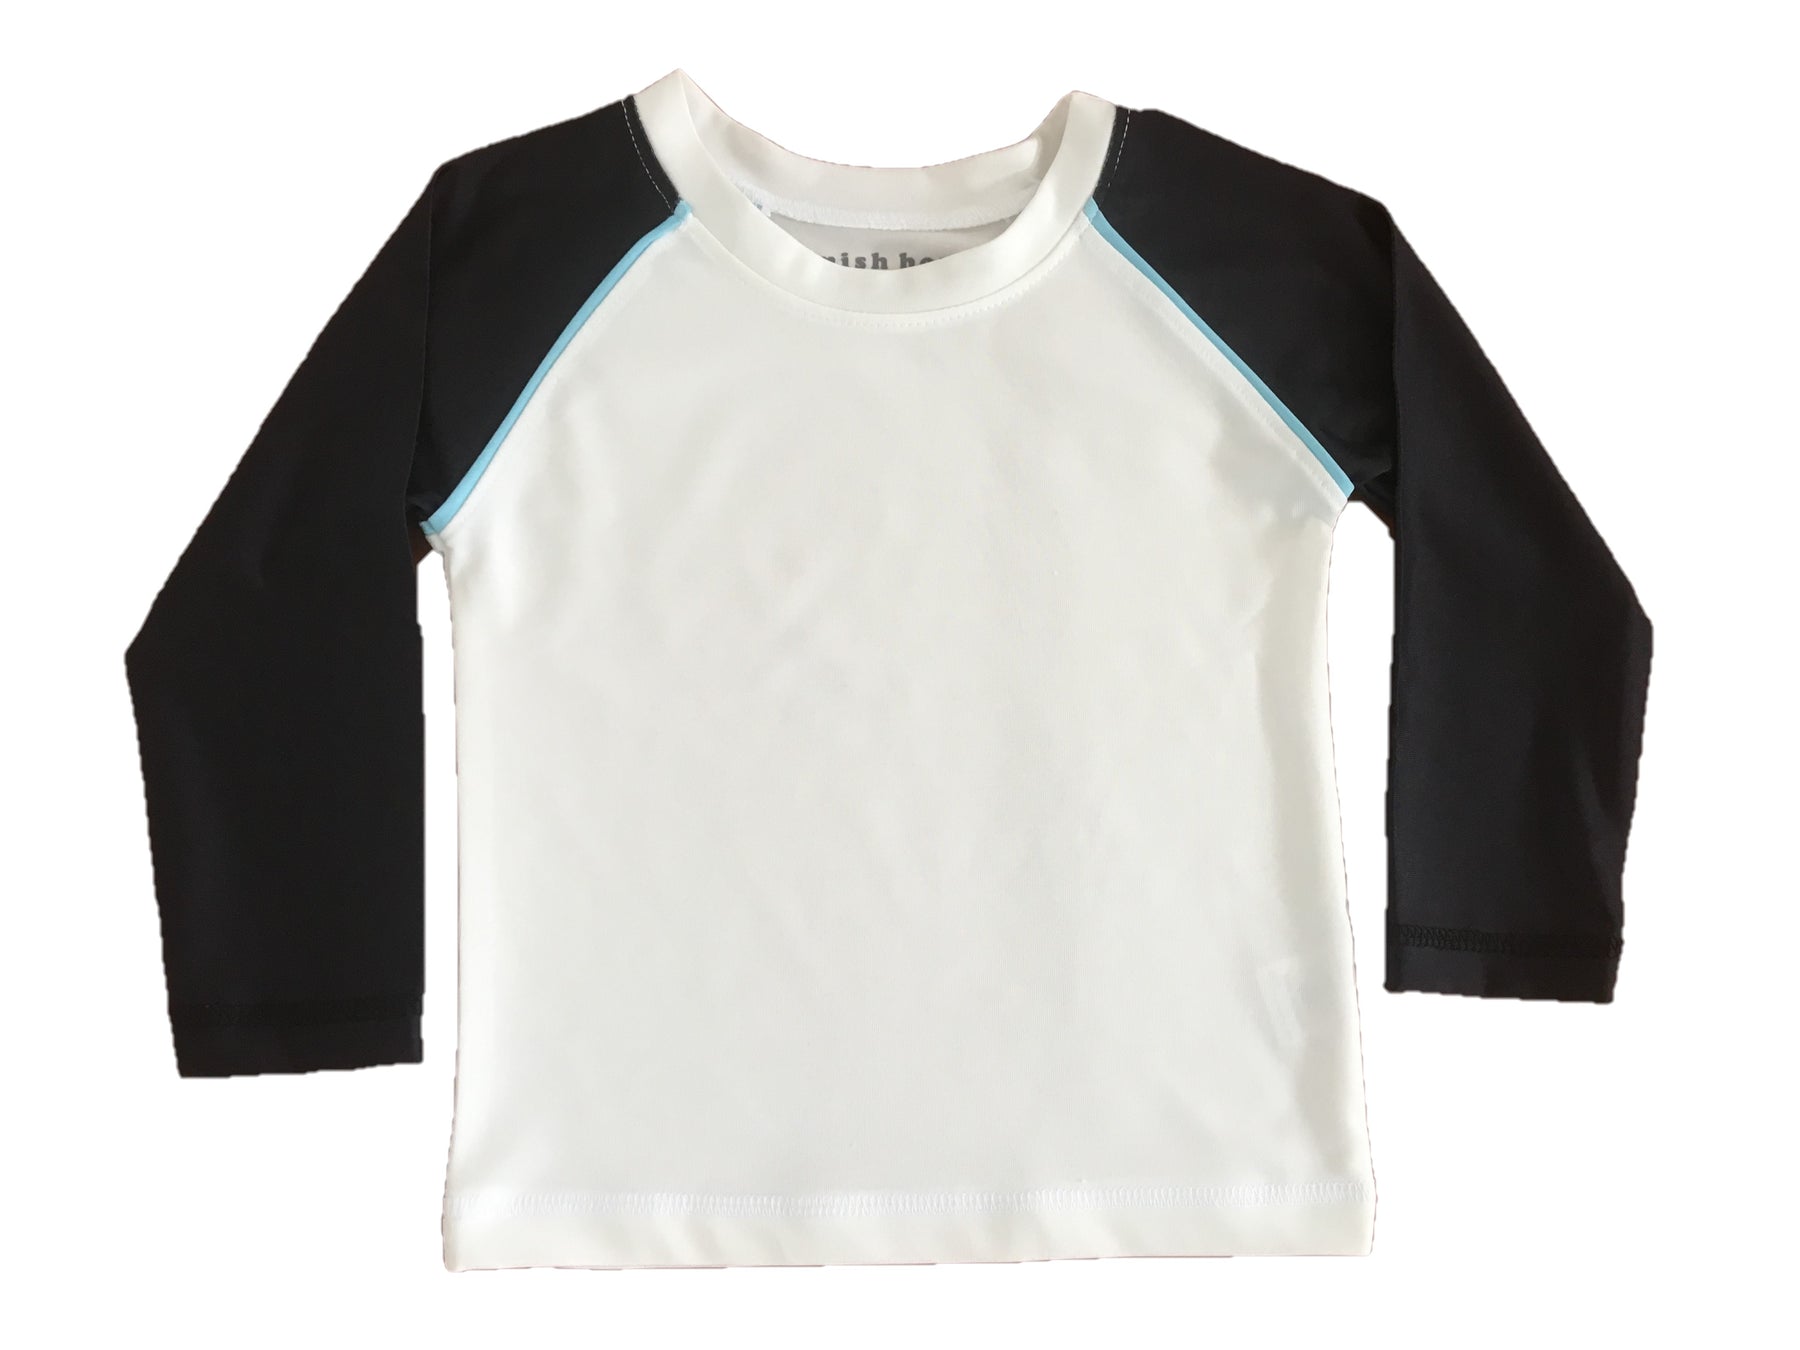 Baby Swim Long Sleeve Rash Guard - White and Black with Turquoise Trim (8016322396444)